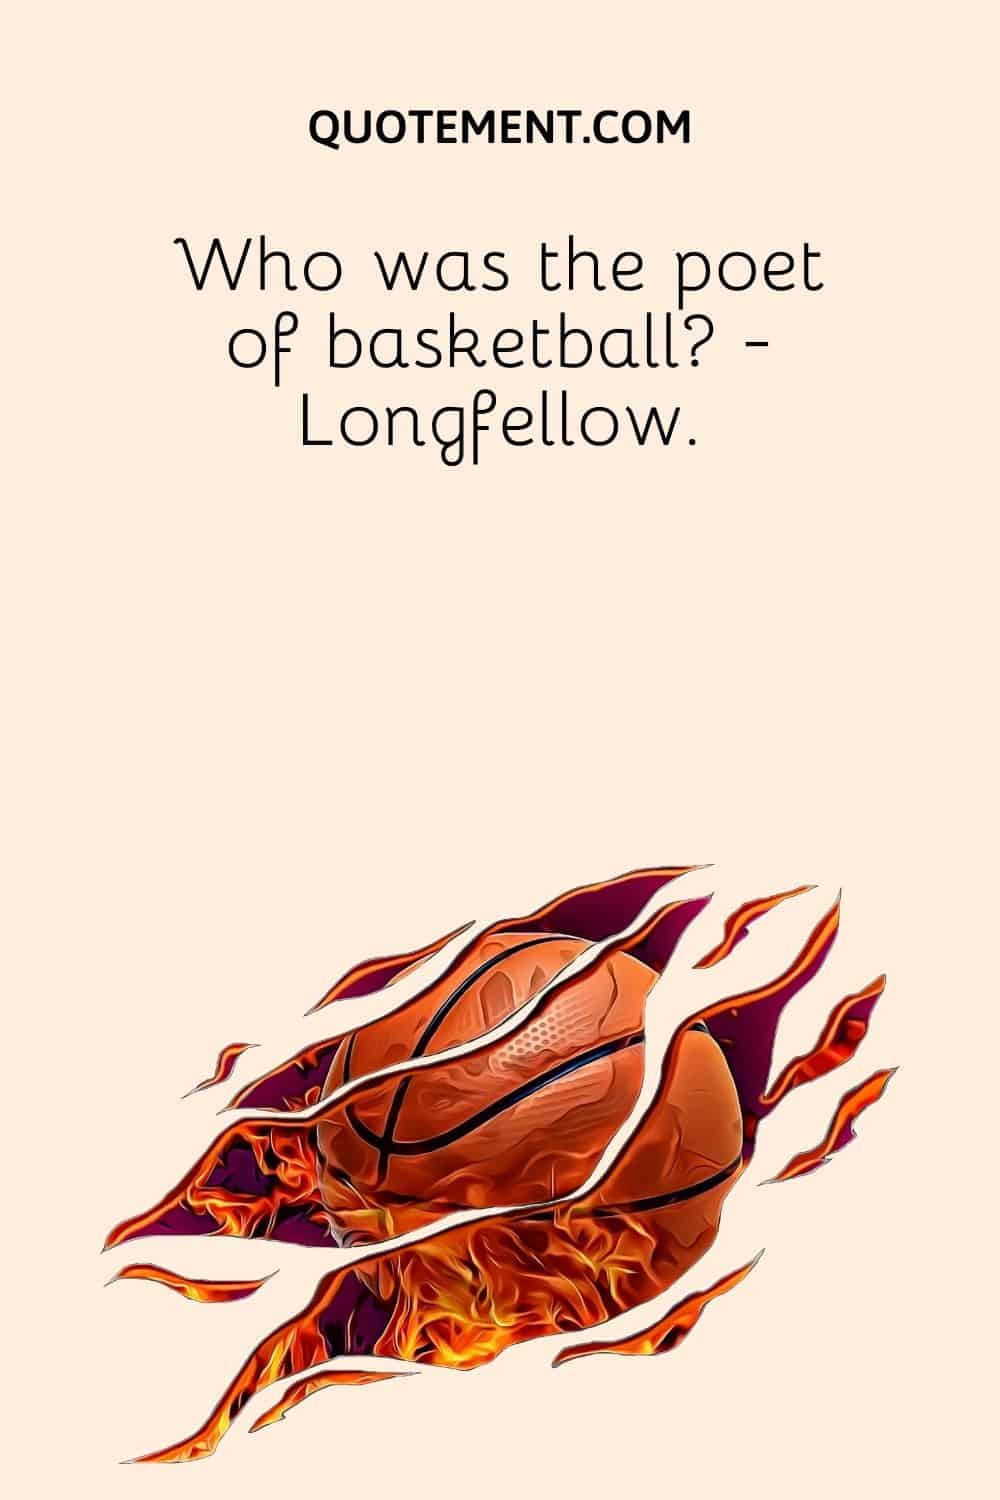 Who was the poet of basketball